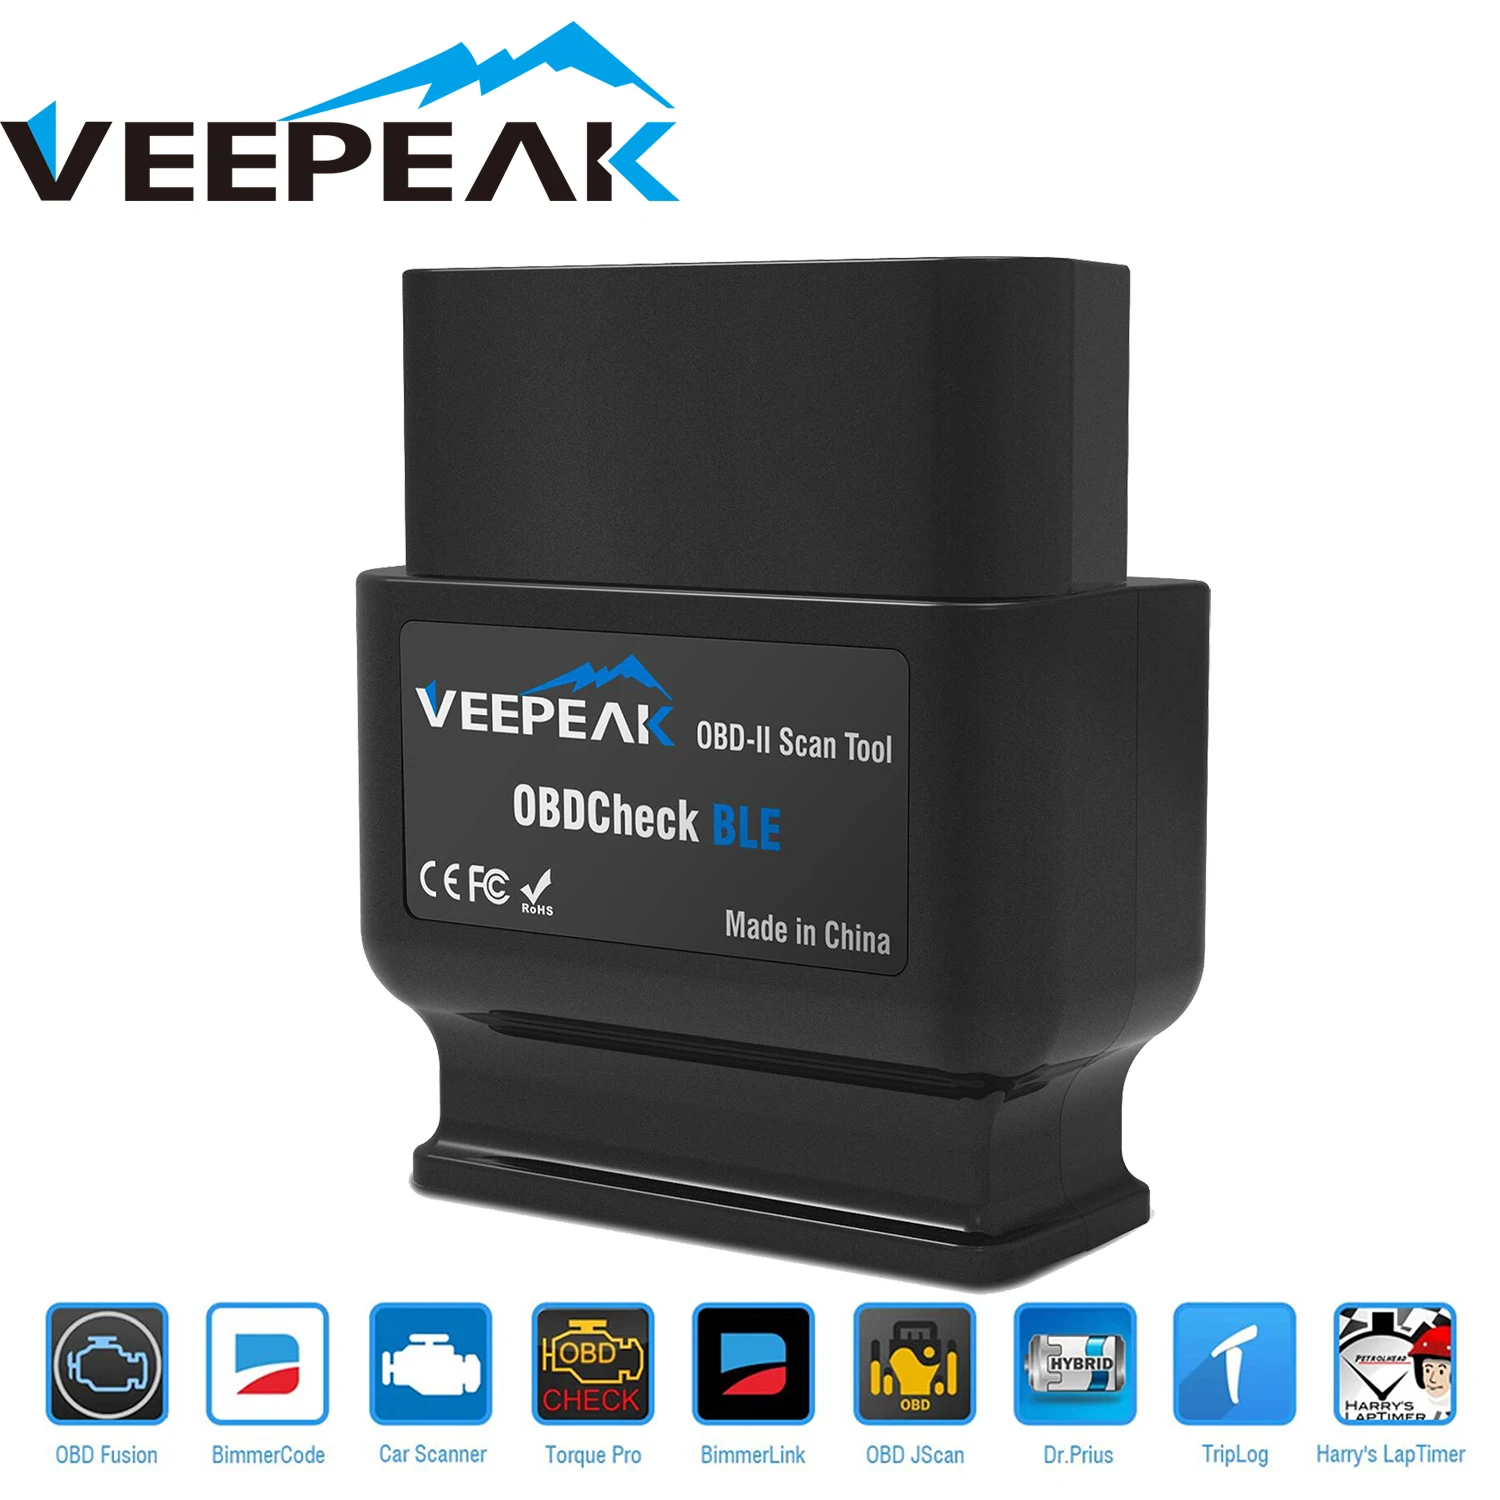 Veepeak OBDCheck BLE OBD2 Bluetooth Scanner Auto OBD II Diagnostic Scan Tool for iOS & Android, BT4.0 Car Check Engine mucar cs90 professional obd2 scanner tools 28 maintenance services ecm system lifetime free updater all car scan diagnostic tool